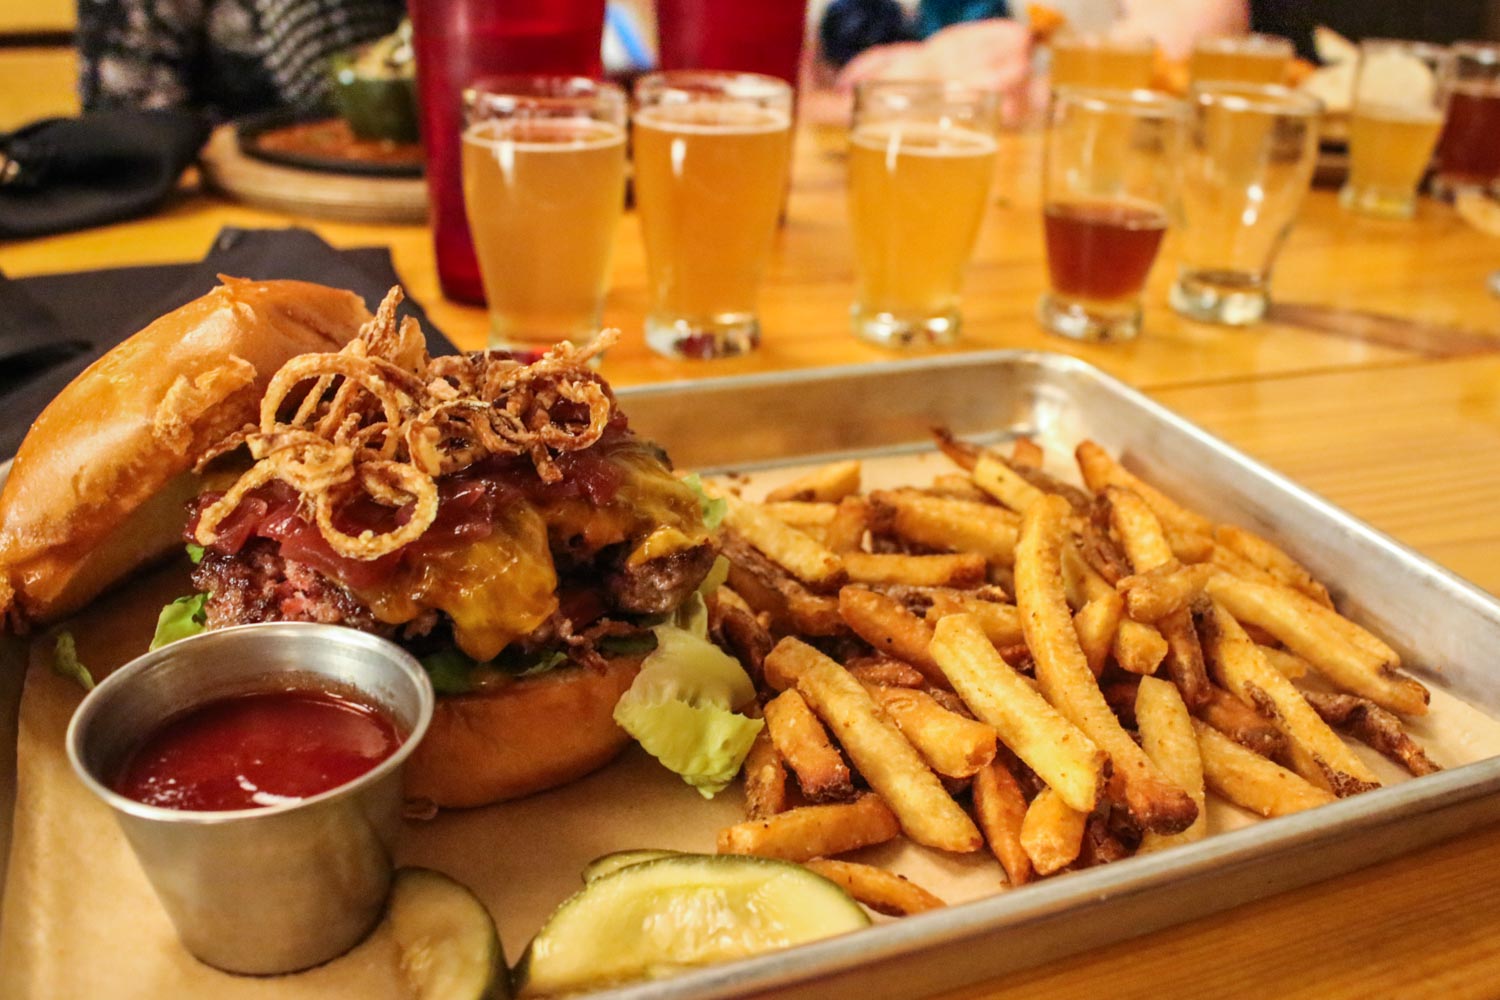 The Coma Burger at the Braindead Brewery, Deep Ellum © Shanna Jones / Lonely Planet